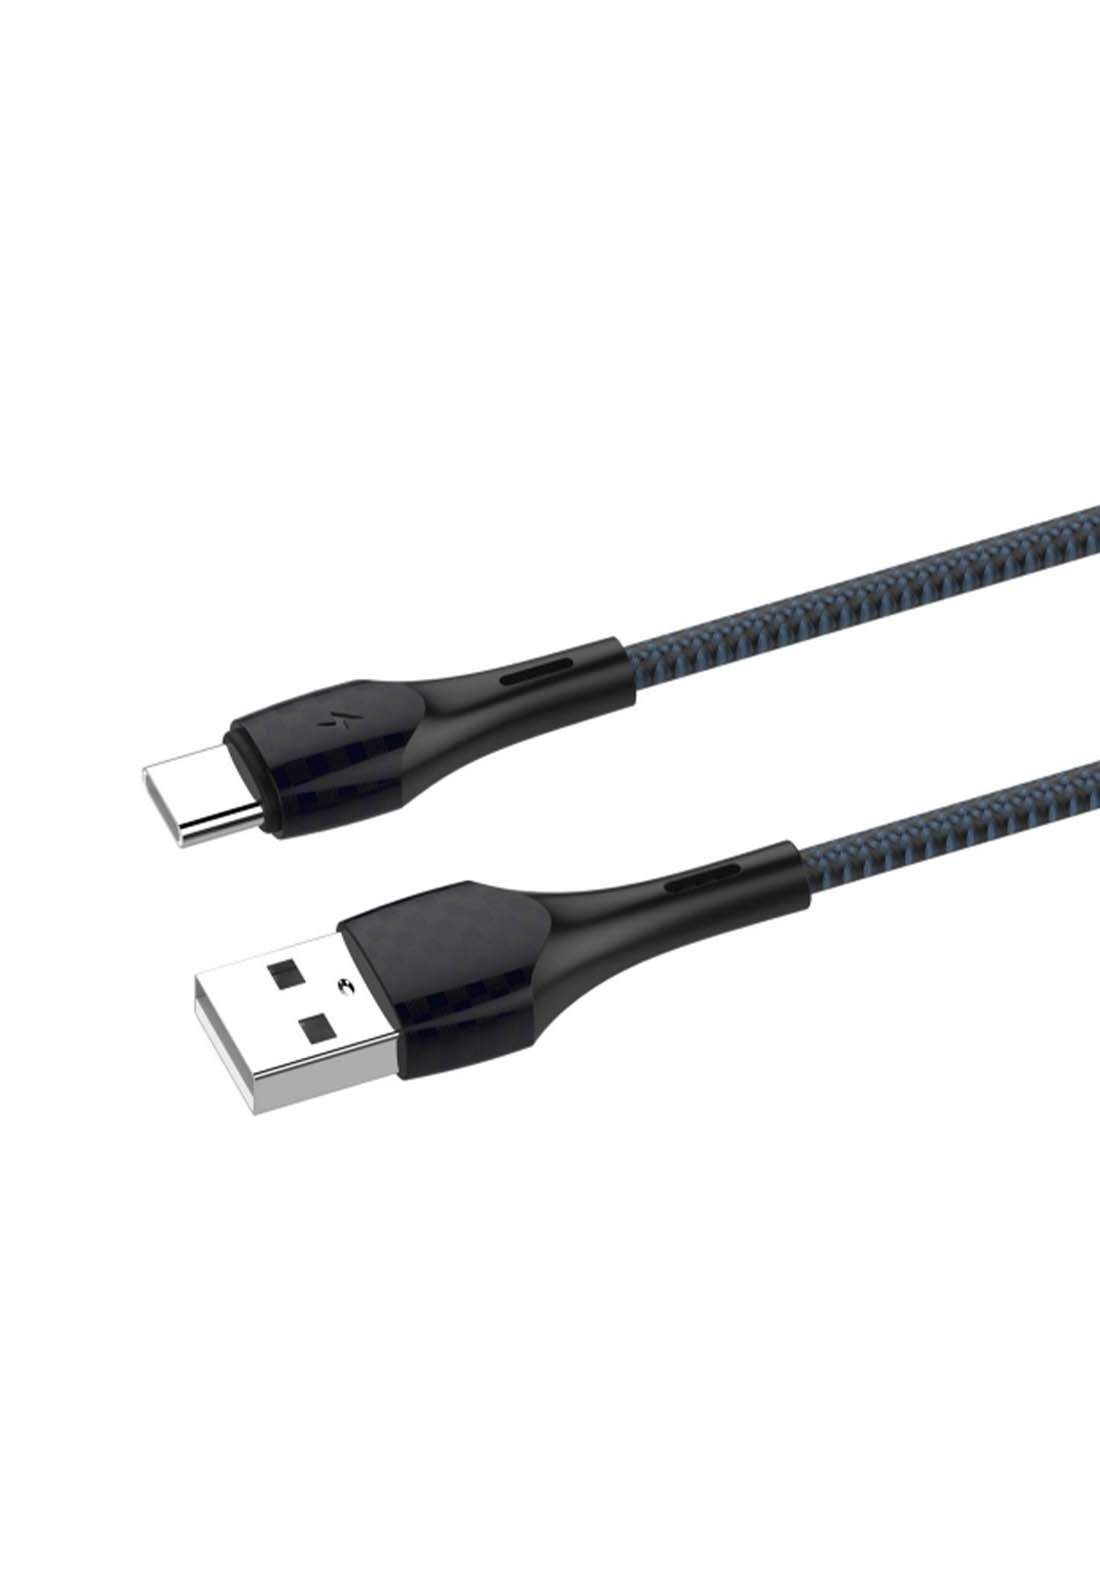 Ldnio USB-A to USB-C Charging Cable, 1 Meter, 2.4A, Grey - LS521